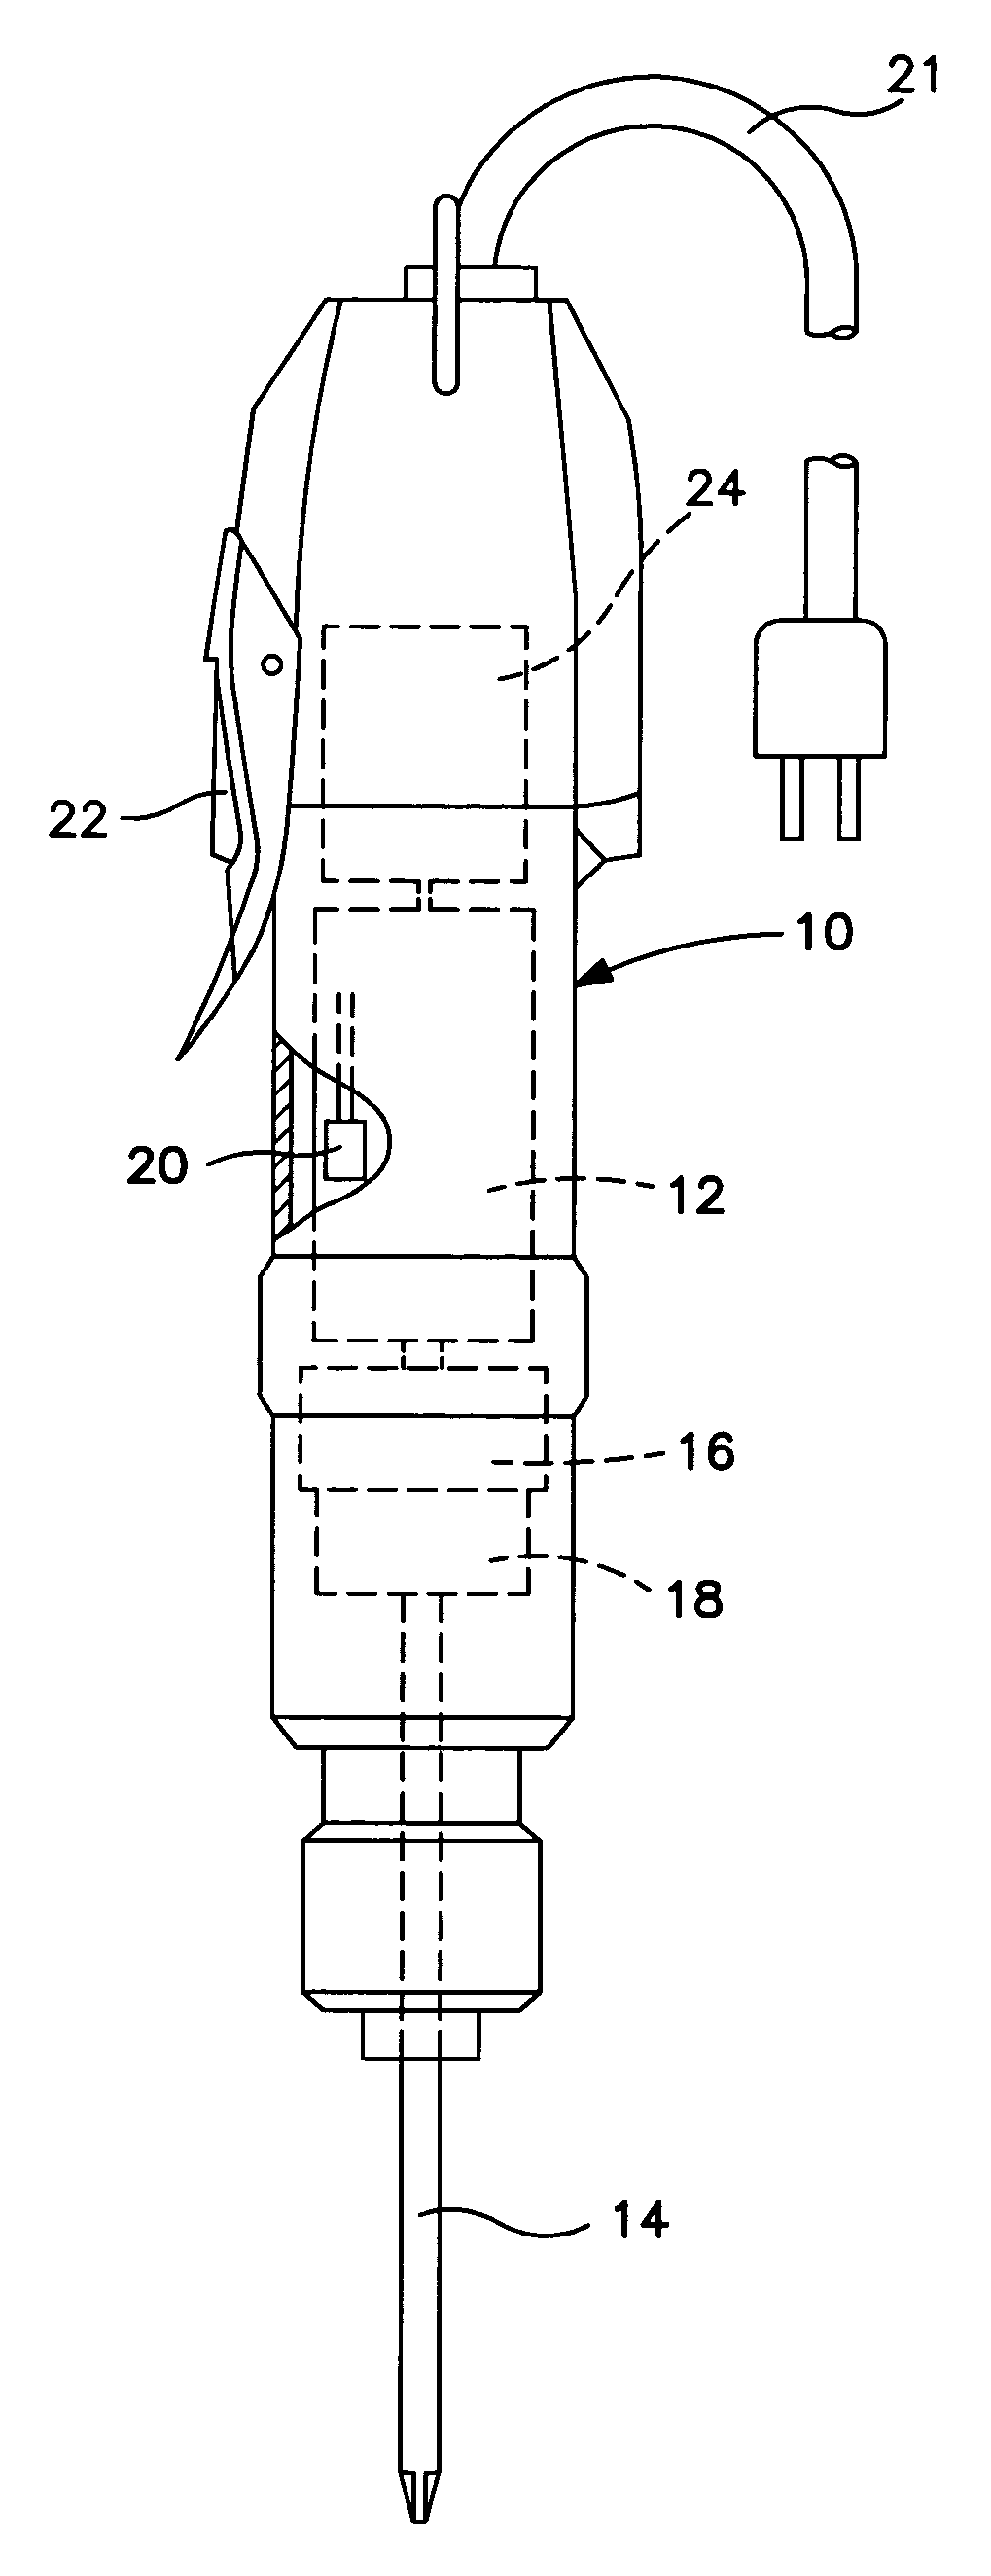 Motor-driven rotary tool with internal heating temperature detecting function